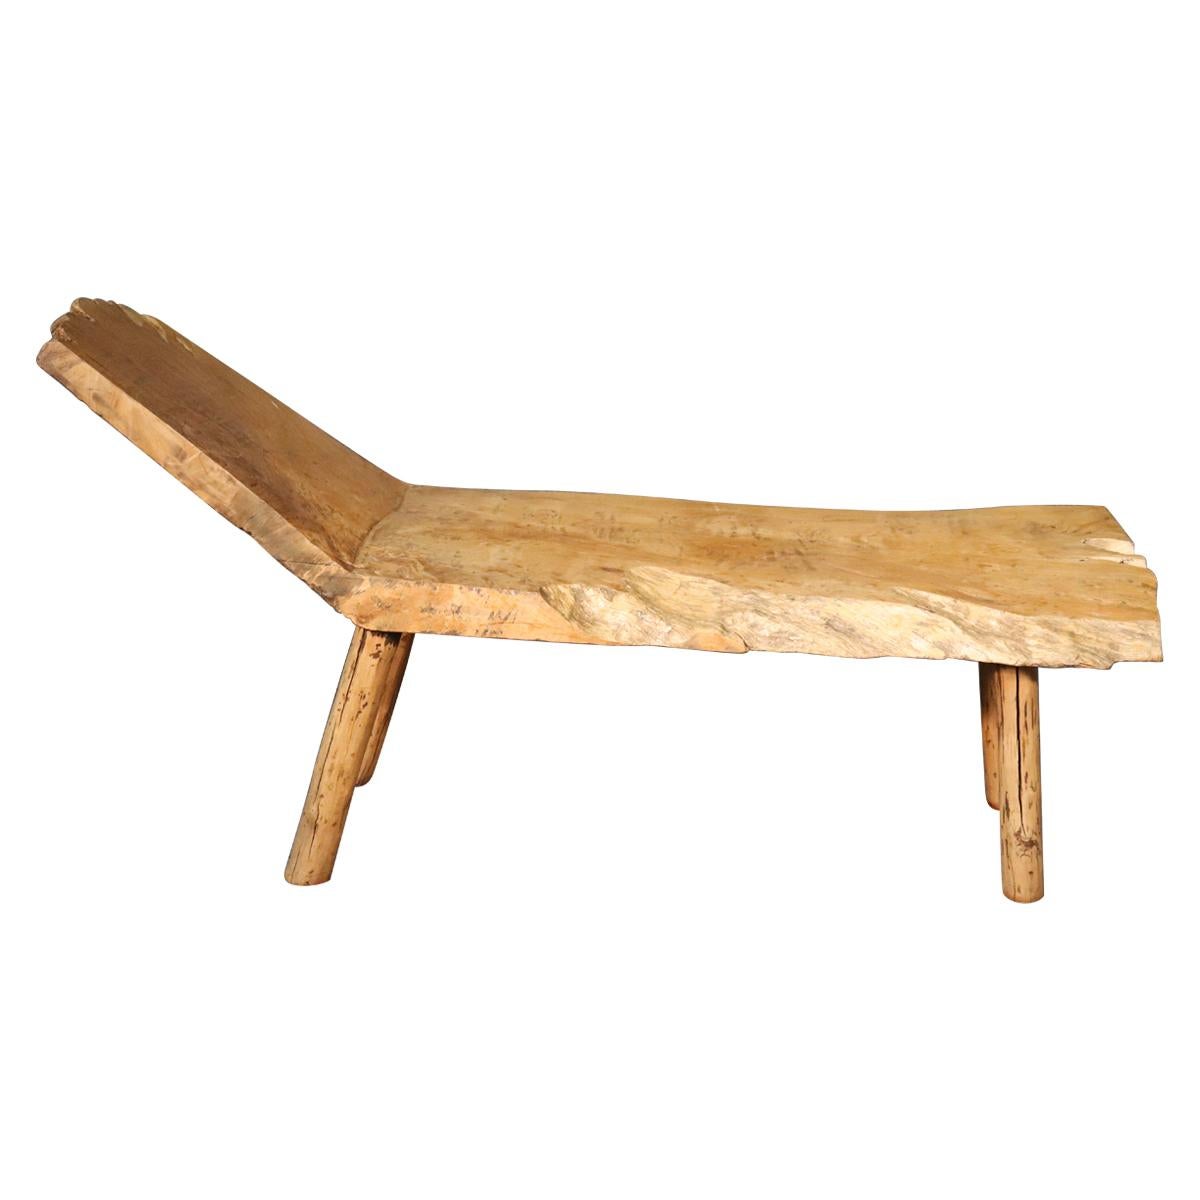 Live Edge Studio Rustic Spalted Walnut Chaise Daybed Recamier